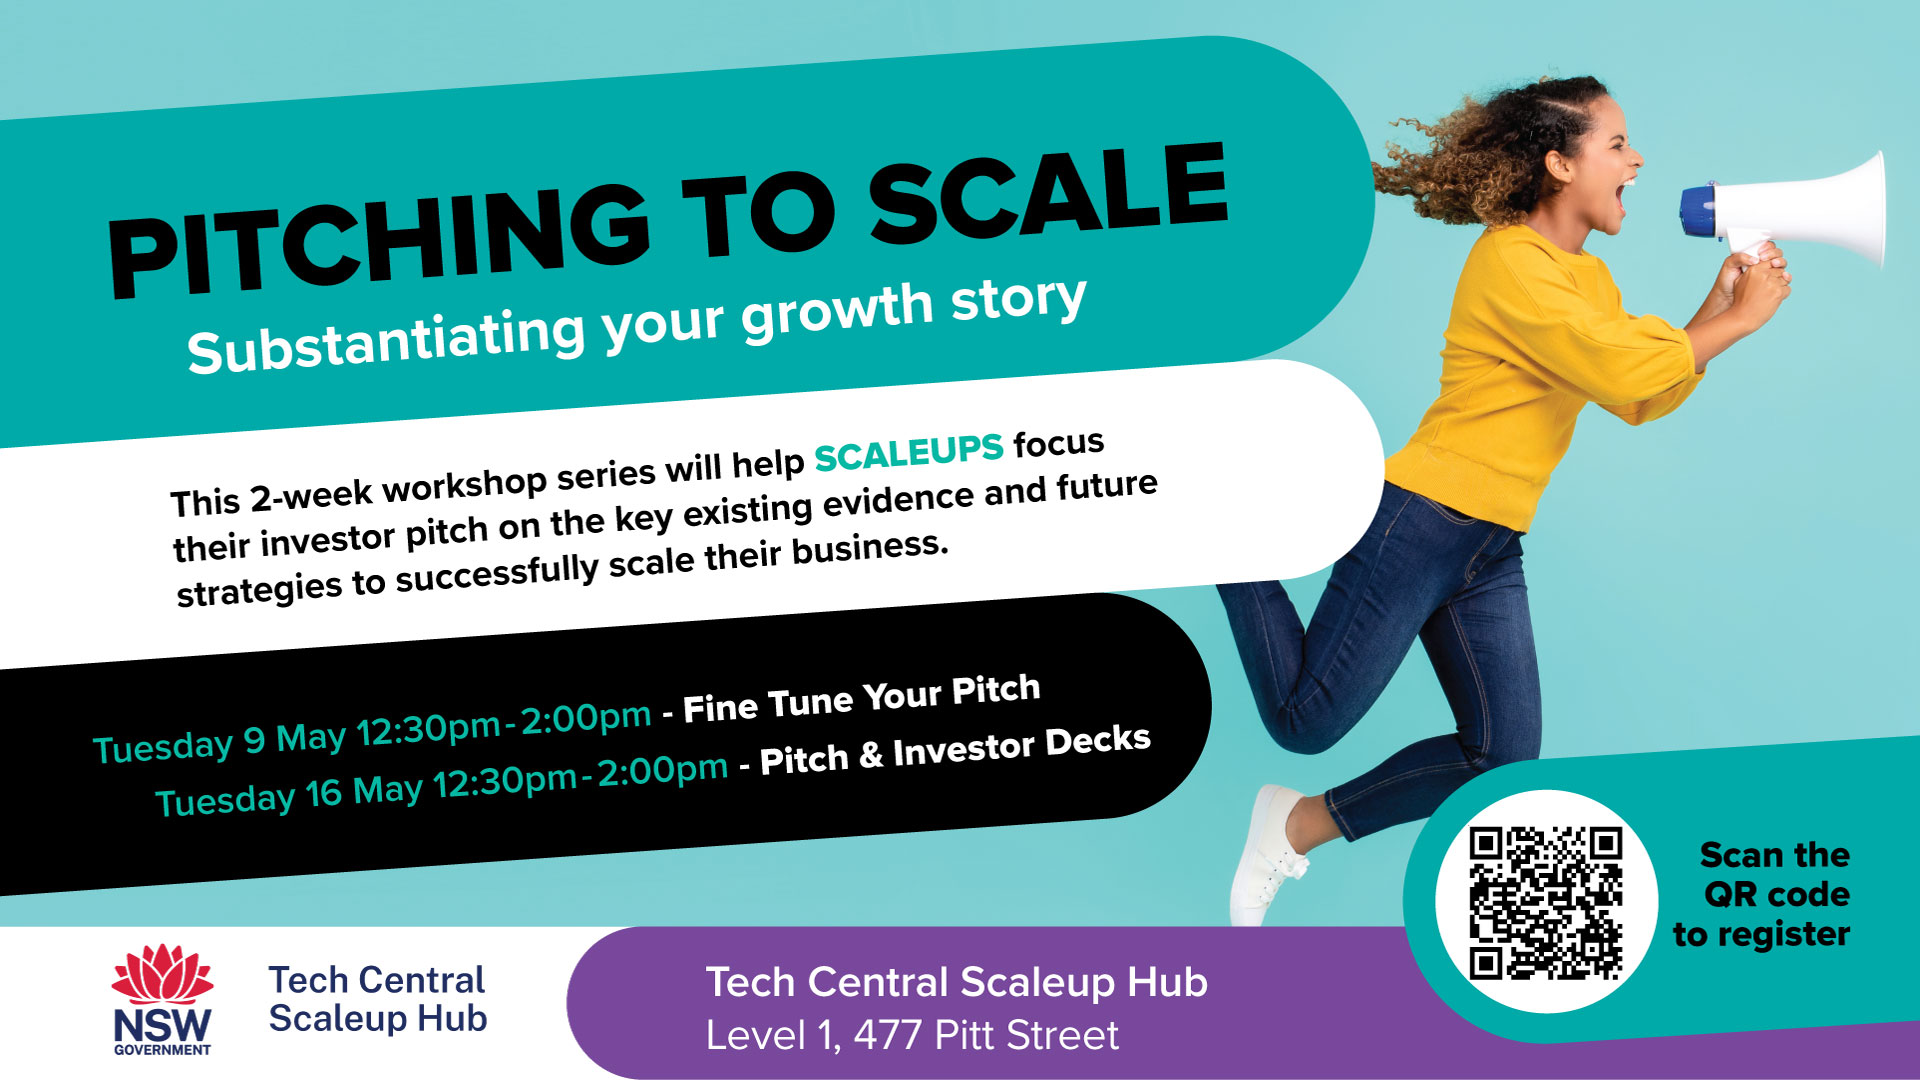 Pitching to scale substanciating your growth story 2 week workshop series will help scaleups 9/5/23 12:30-2pm fine tune your pitch and 16/05/23 12:30-2pm Pitch and investor decks